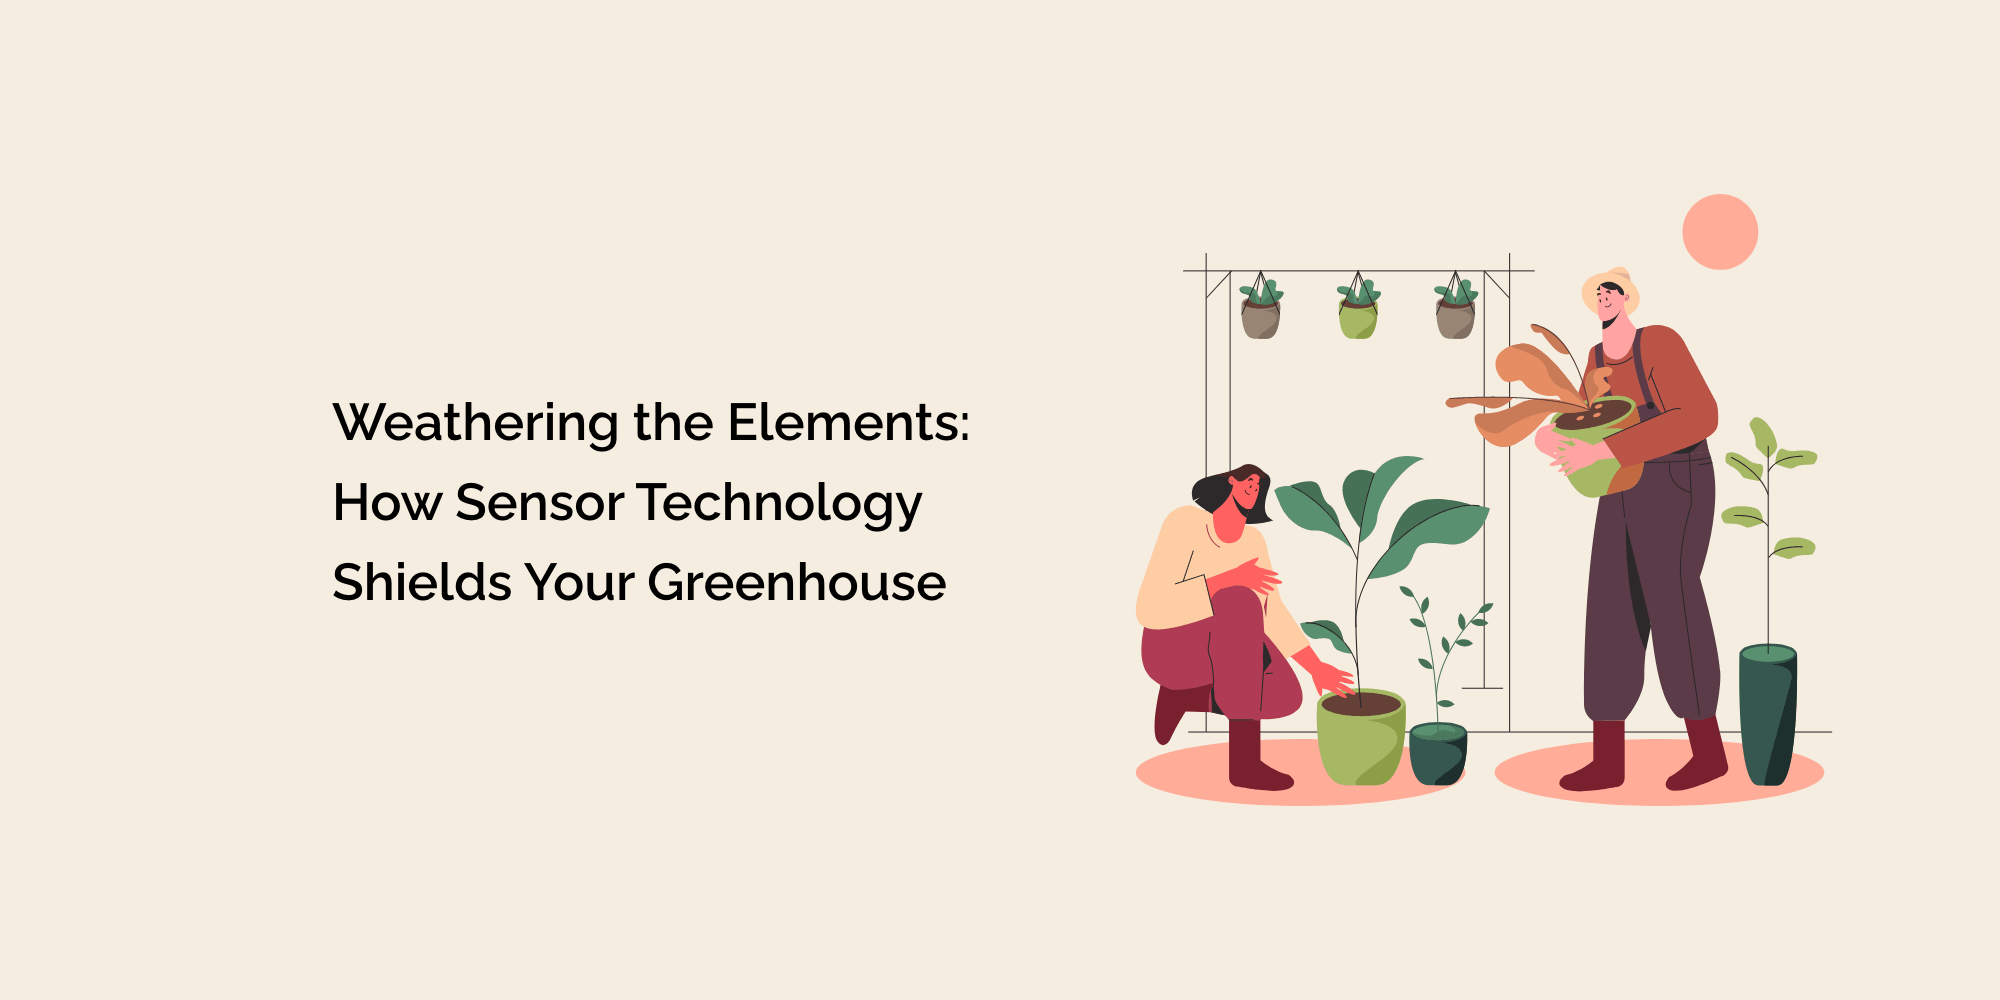 Weathering the Elements: How Sensor Technology Shields Your Greenhouse